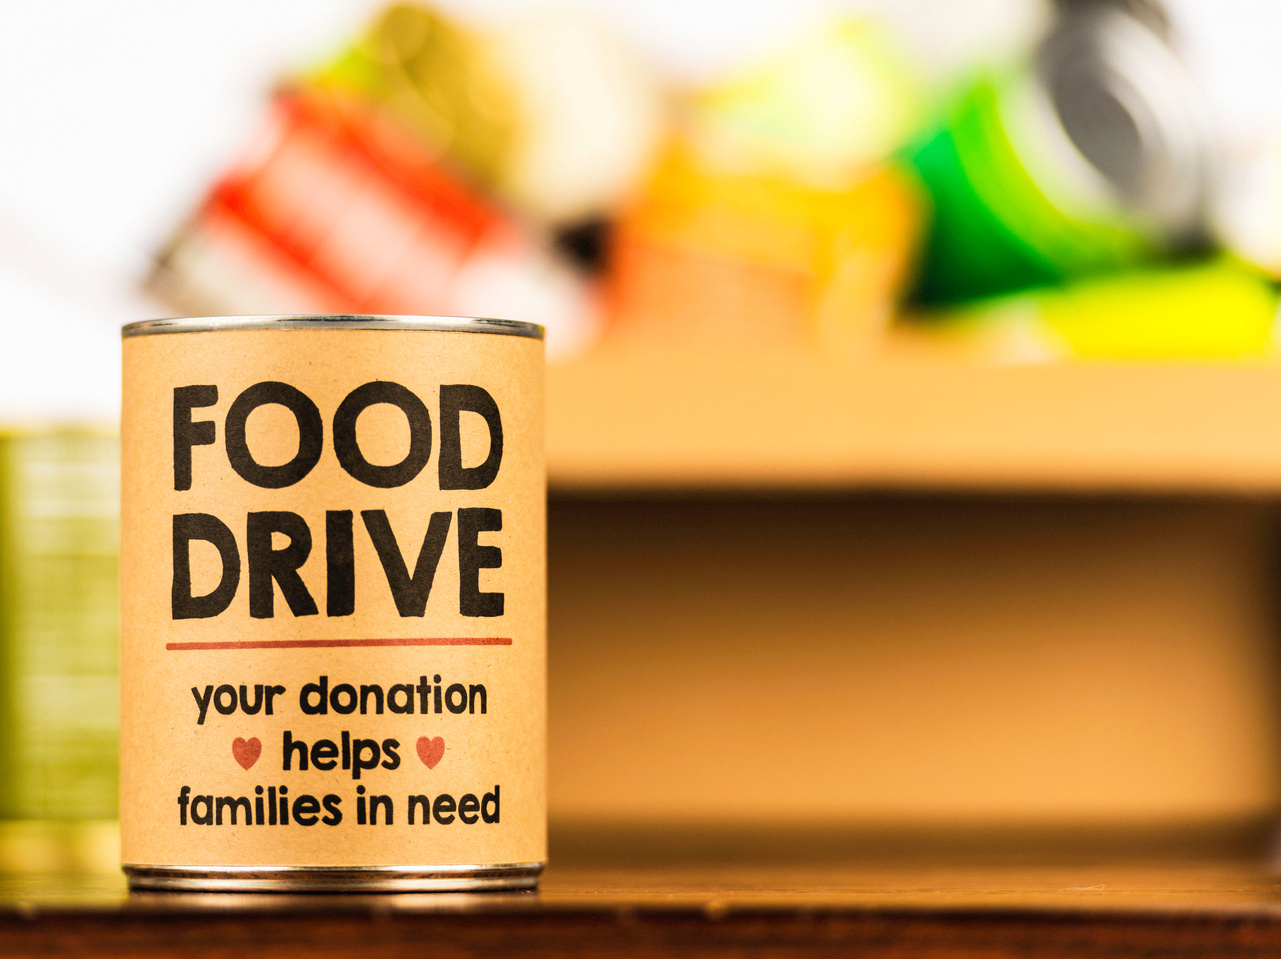 Please support our food drive. Holiday canned food drive